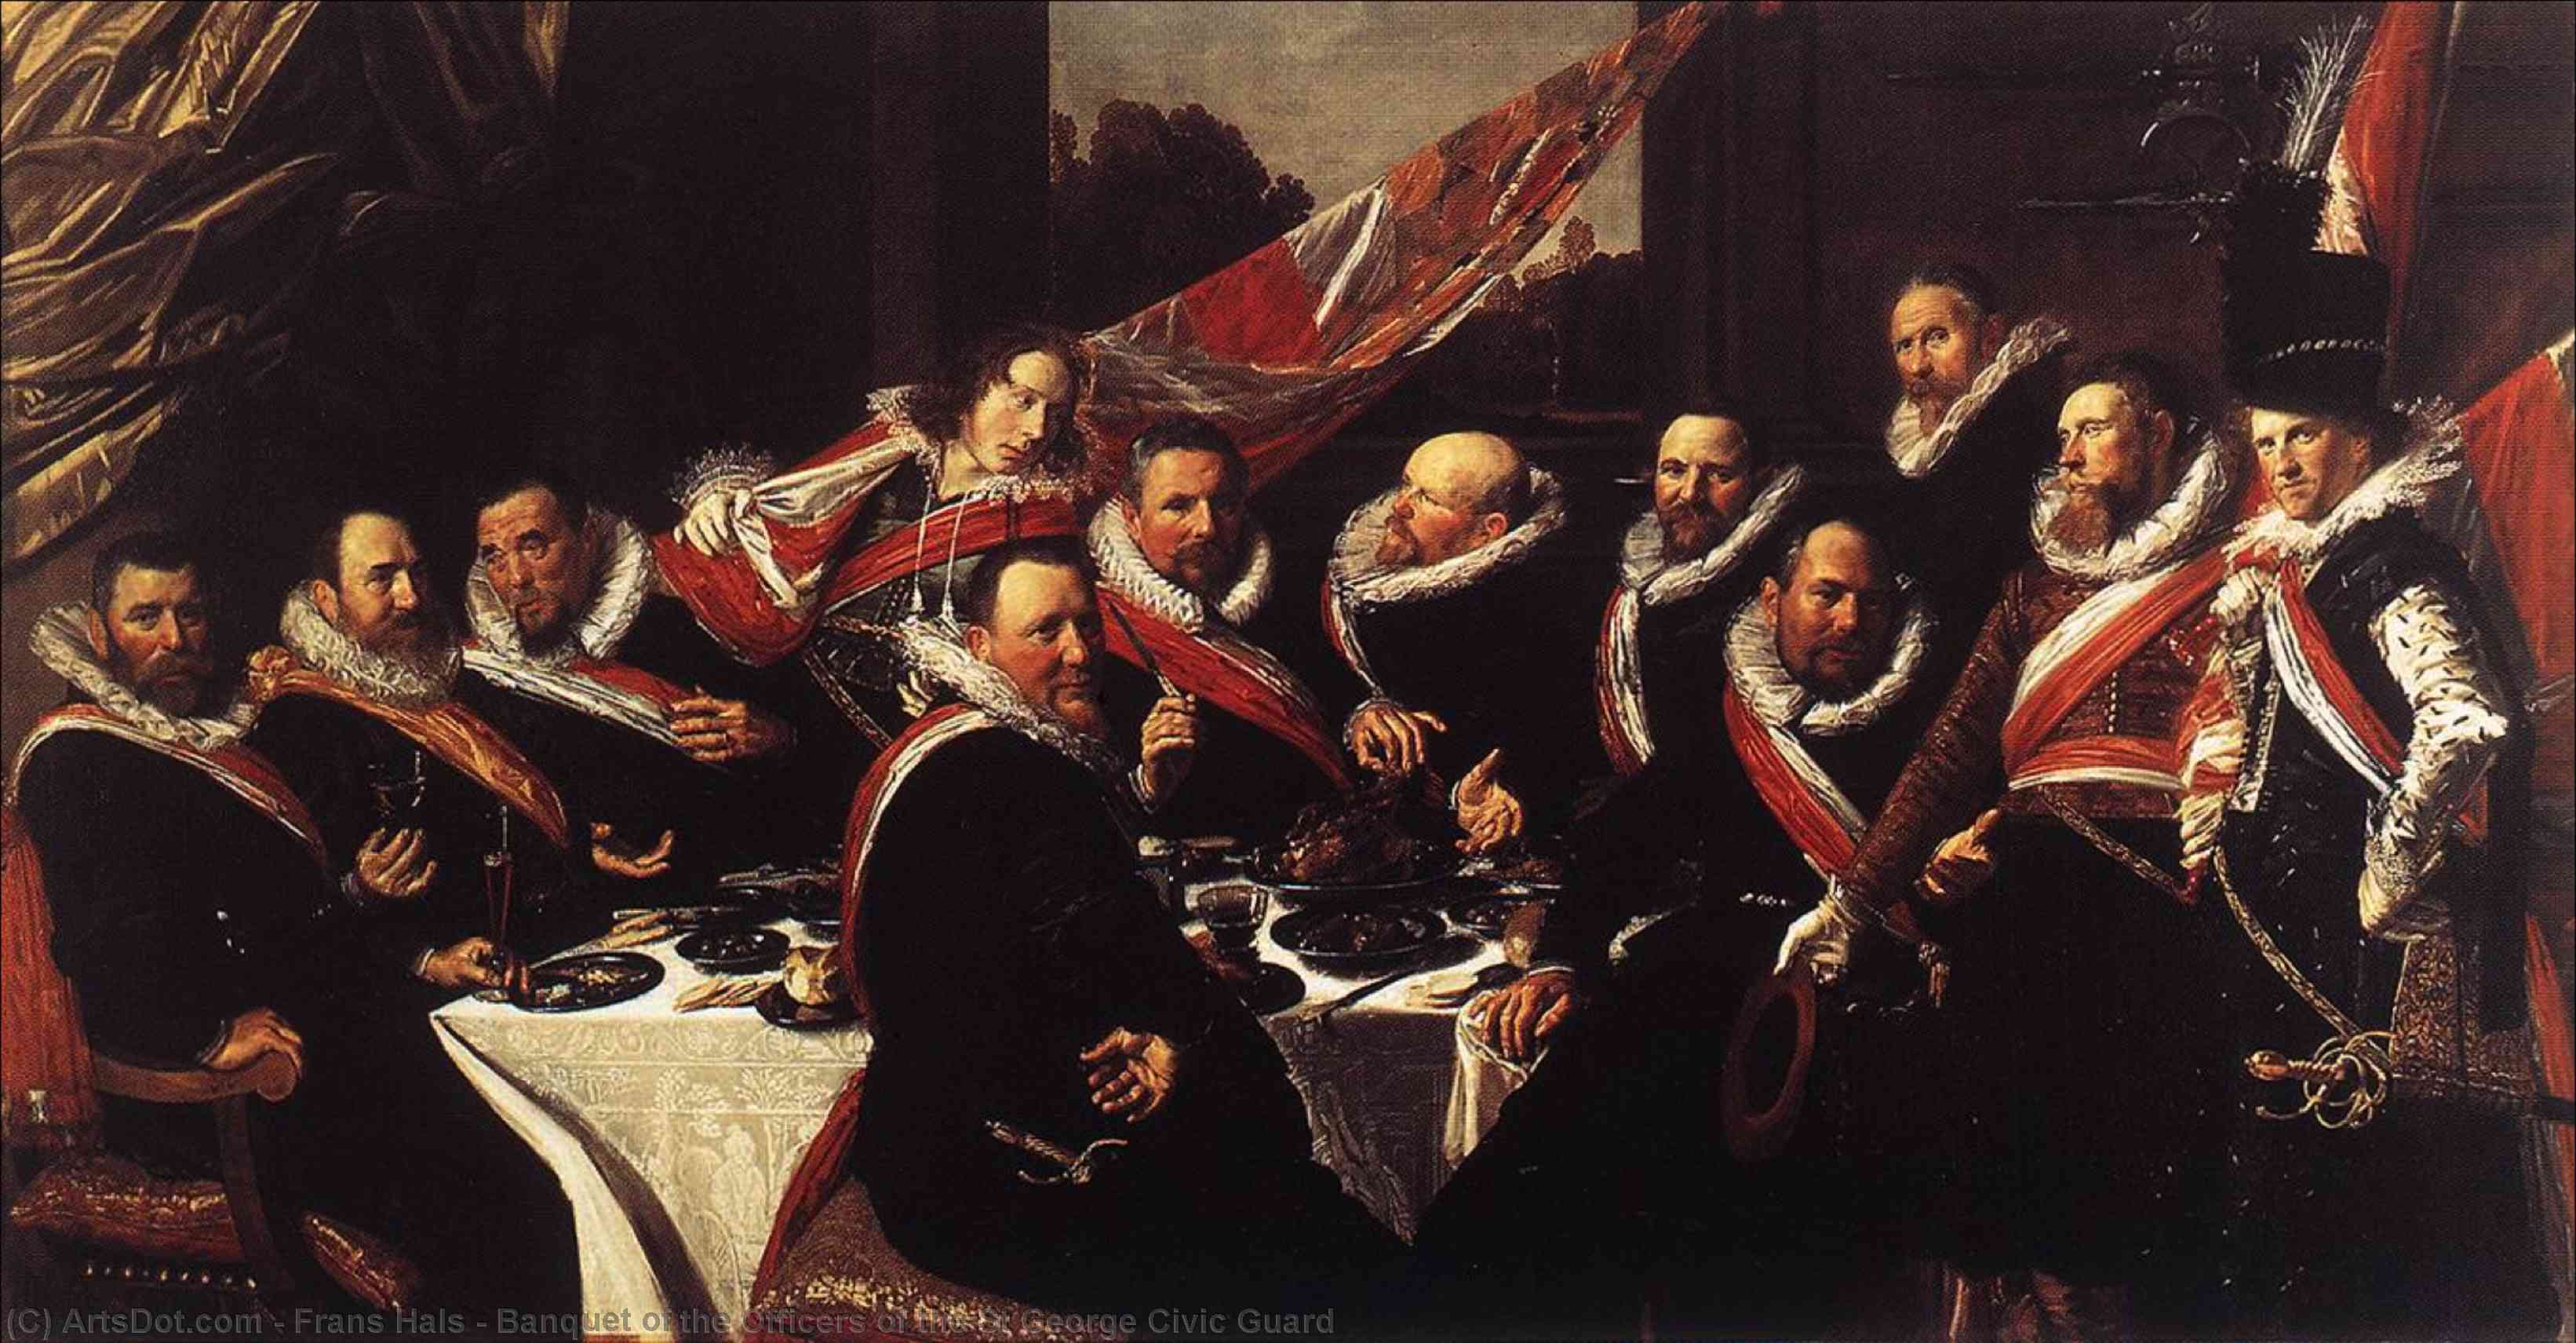 WikiOO.org - Güzel Sanatlar Ansiklopedisi - Resim, Resimler Frans Hals - Banquet of the Officers of the St George Civic Guard